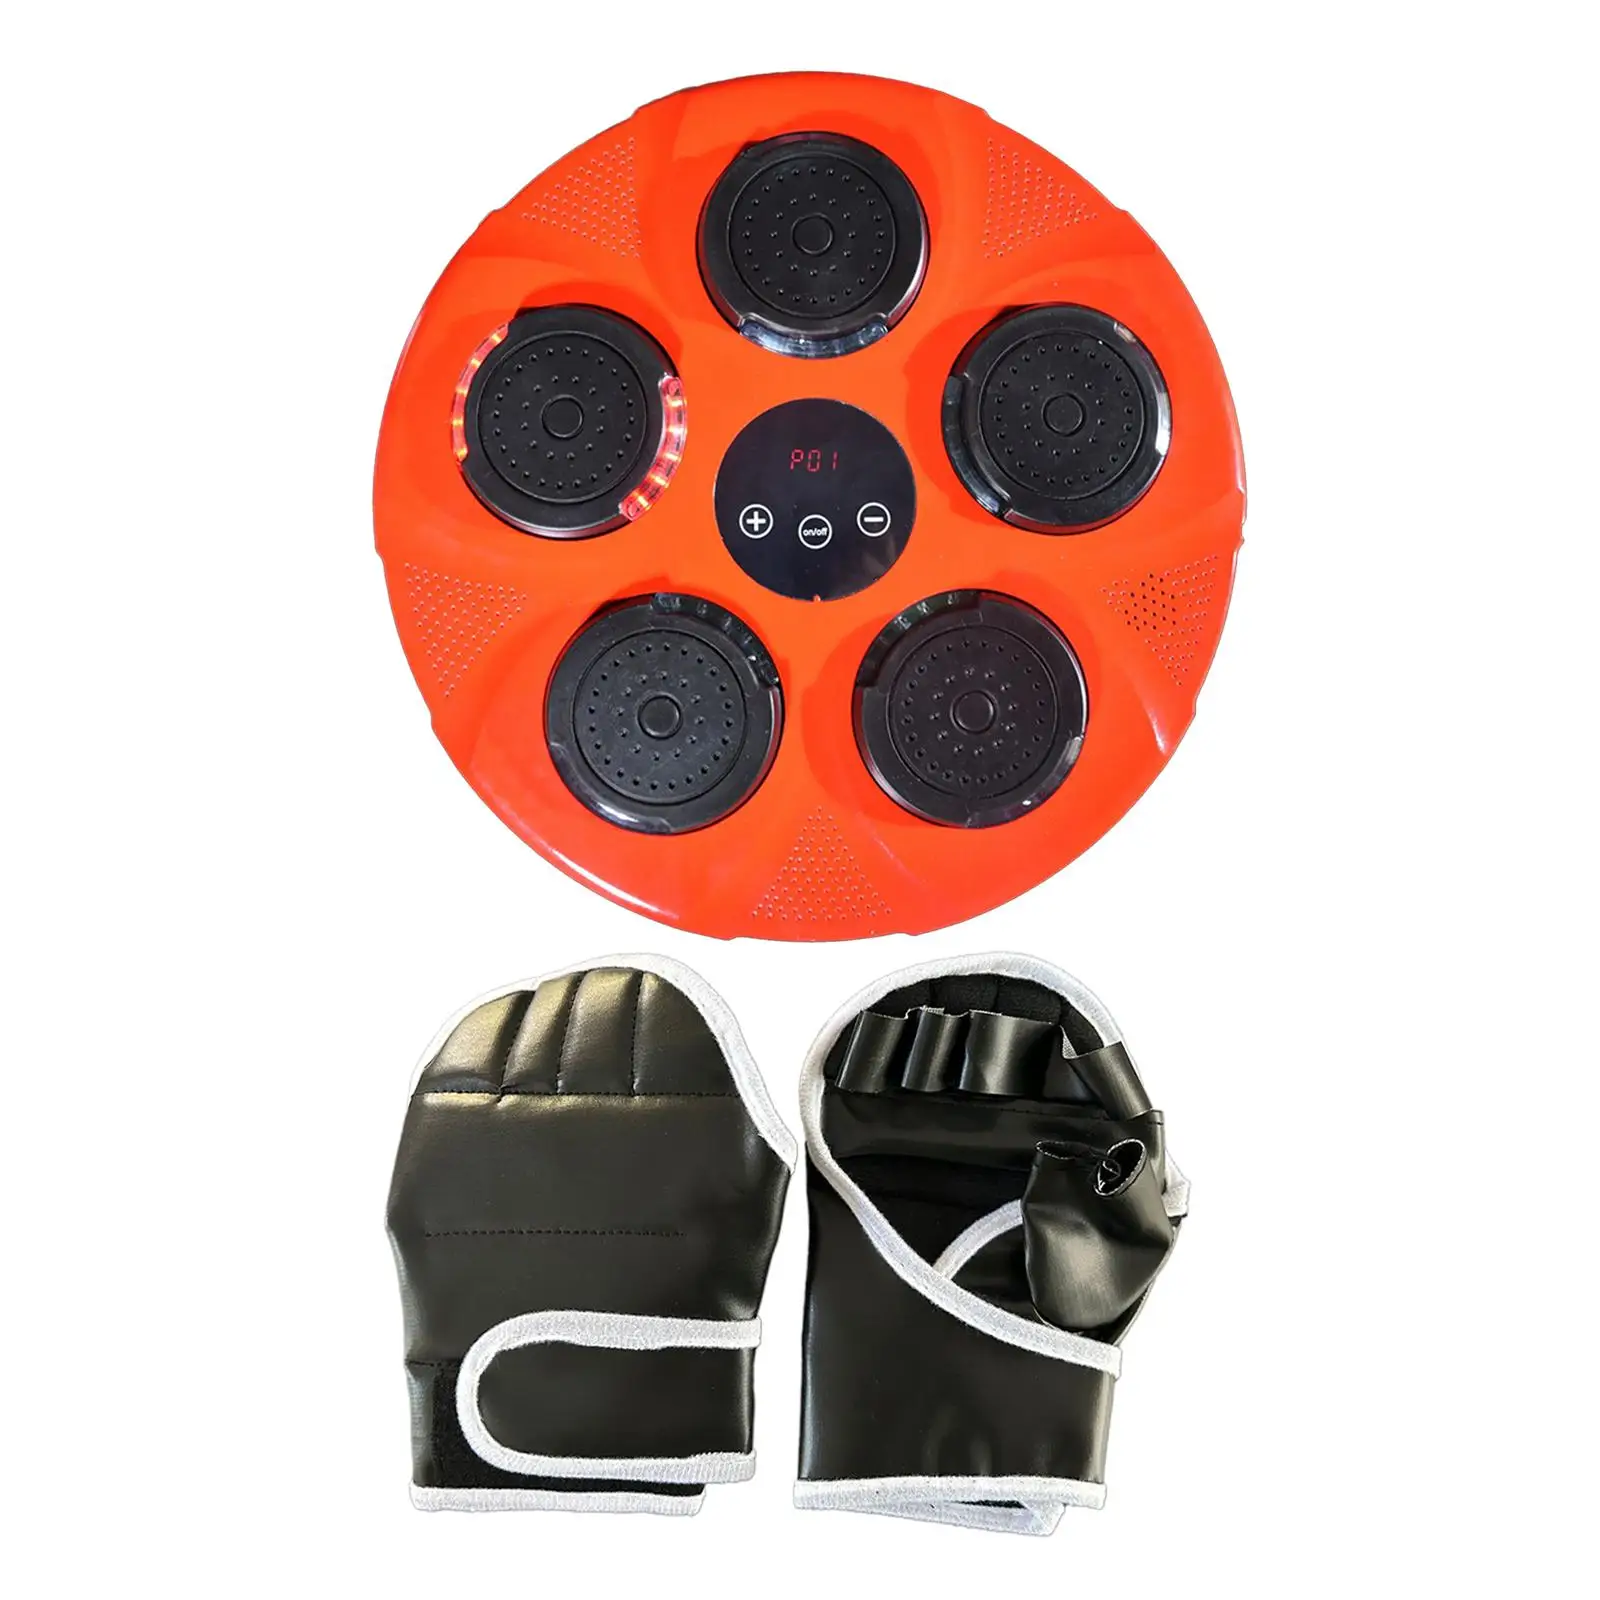 Music Boxing Machine Electronic Boxing Target Lighted Boxing Trainer for Improves Agility Home Gym Practice